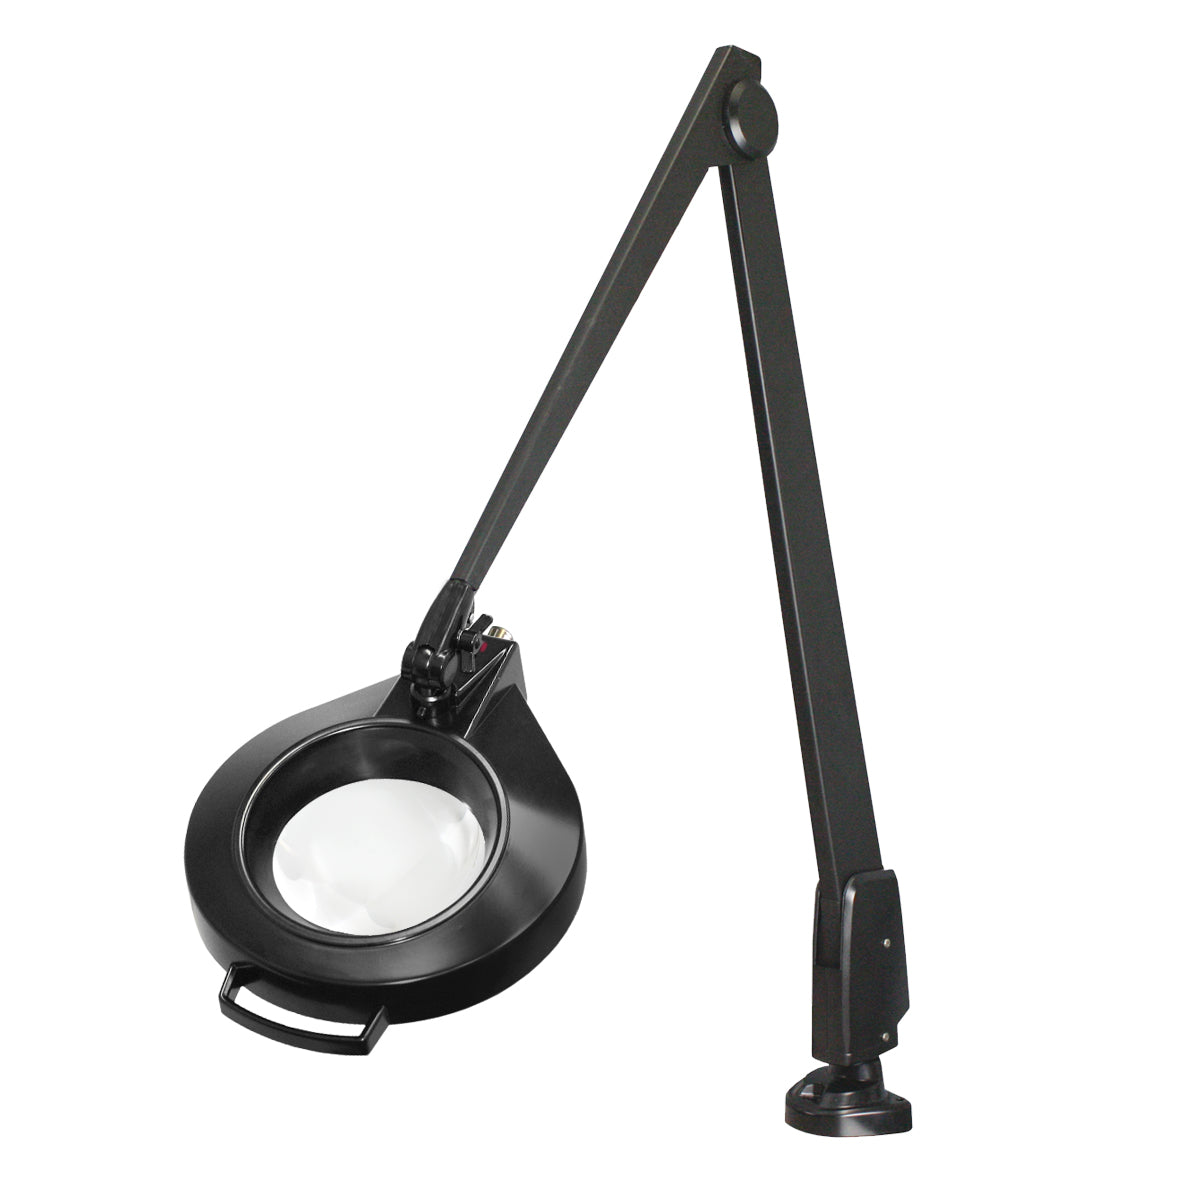 Desktop Magnifying Glass with Light: 3 in 1 Handheld Zambia